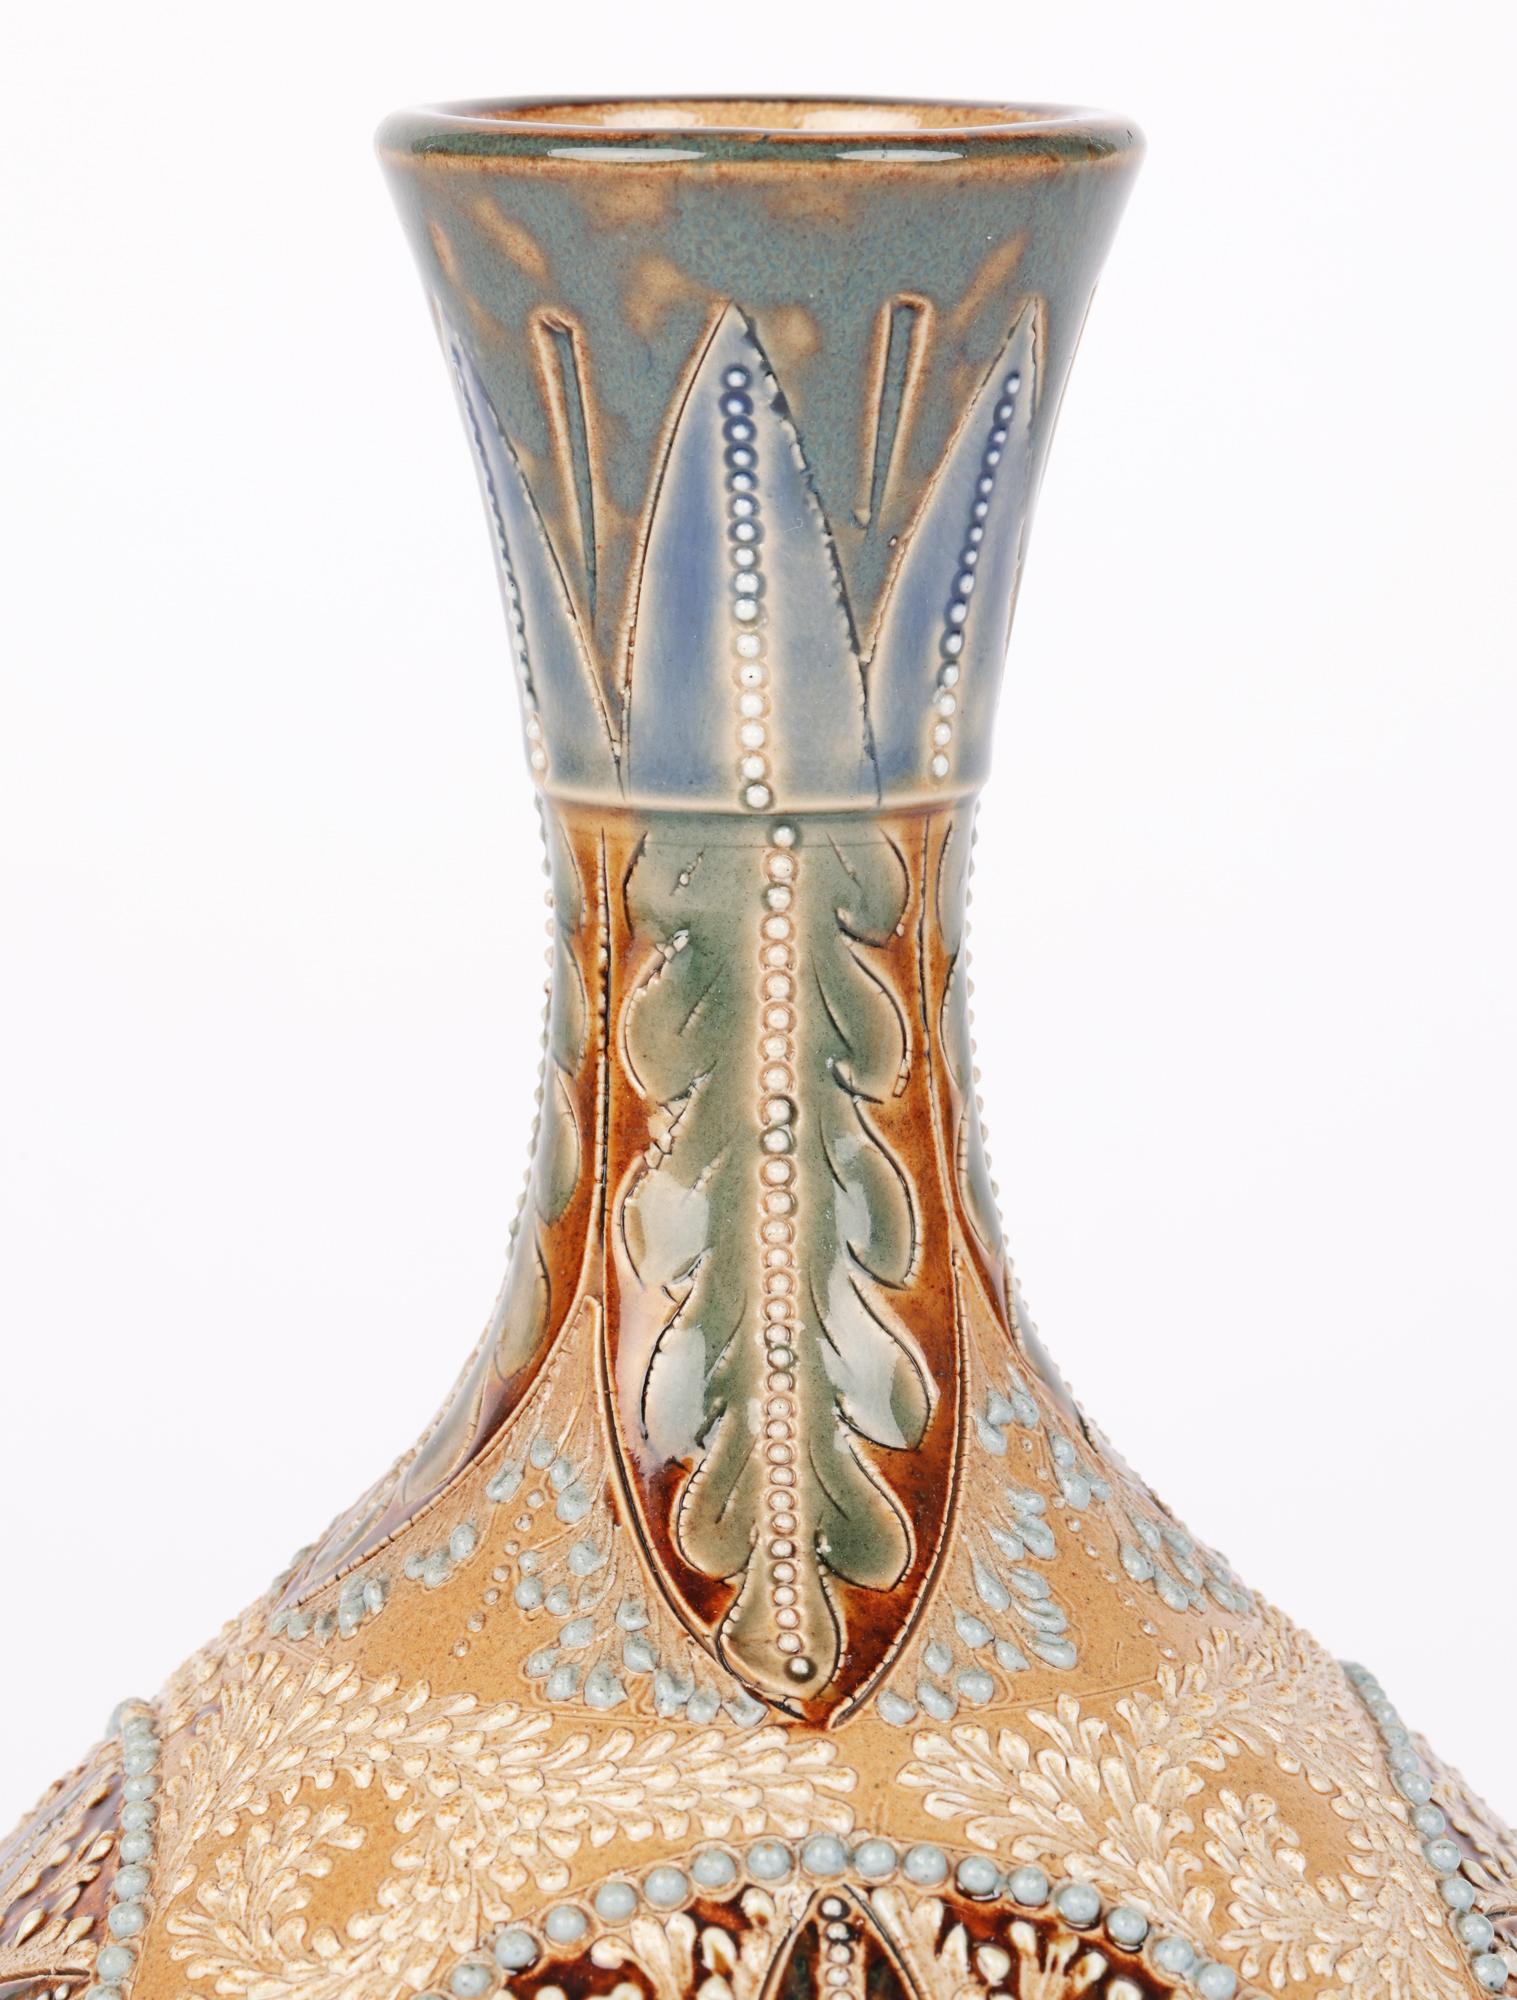 An exceptional and rare Doulton Lambeth Aesthetic Movement onion shaped vase decorated with star like motifs by renowned artist Elizabeth A Sayers dated 1878. 
Elizabeth A Sayers while recongized as a highly accomplished and distinguished artist